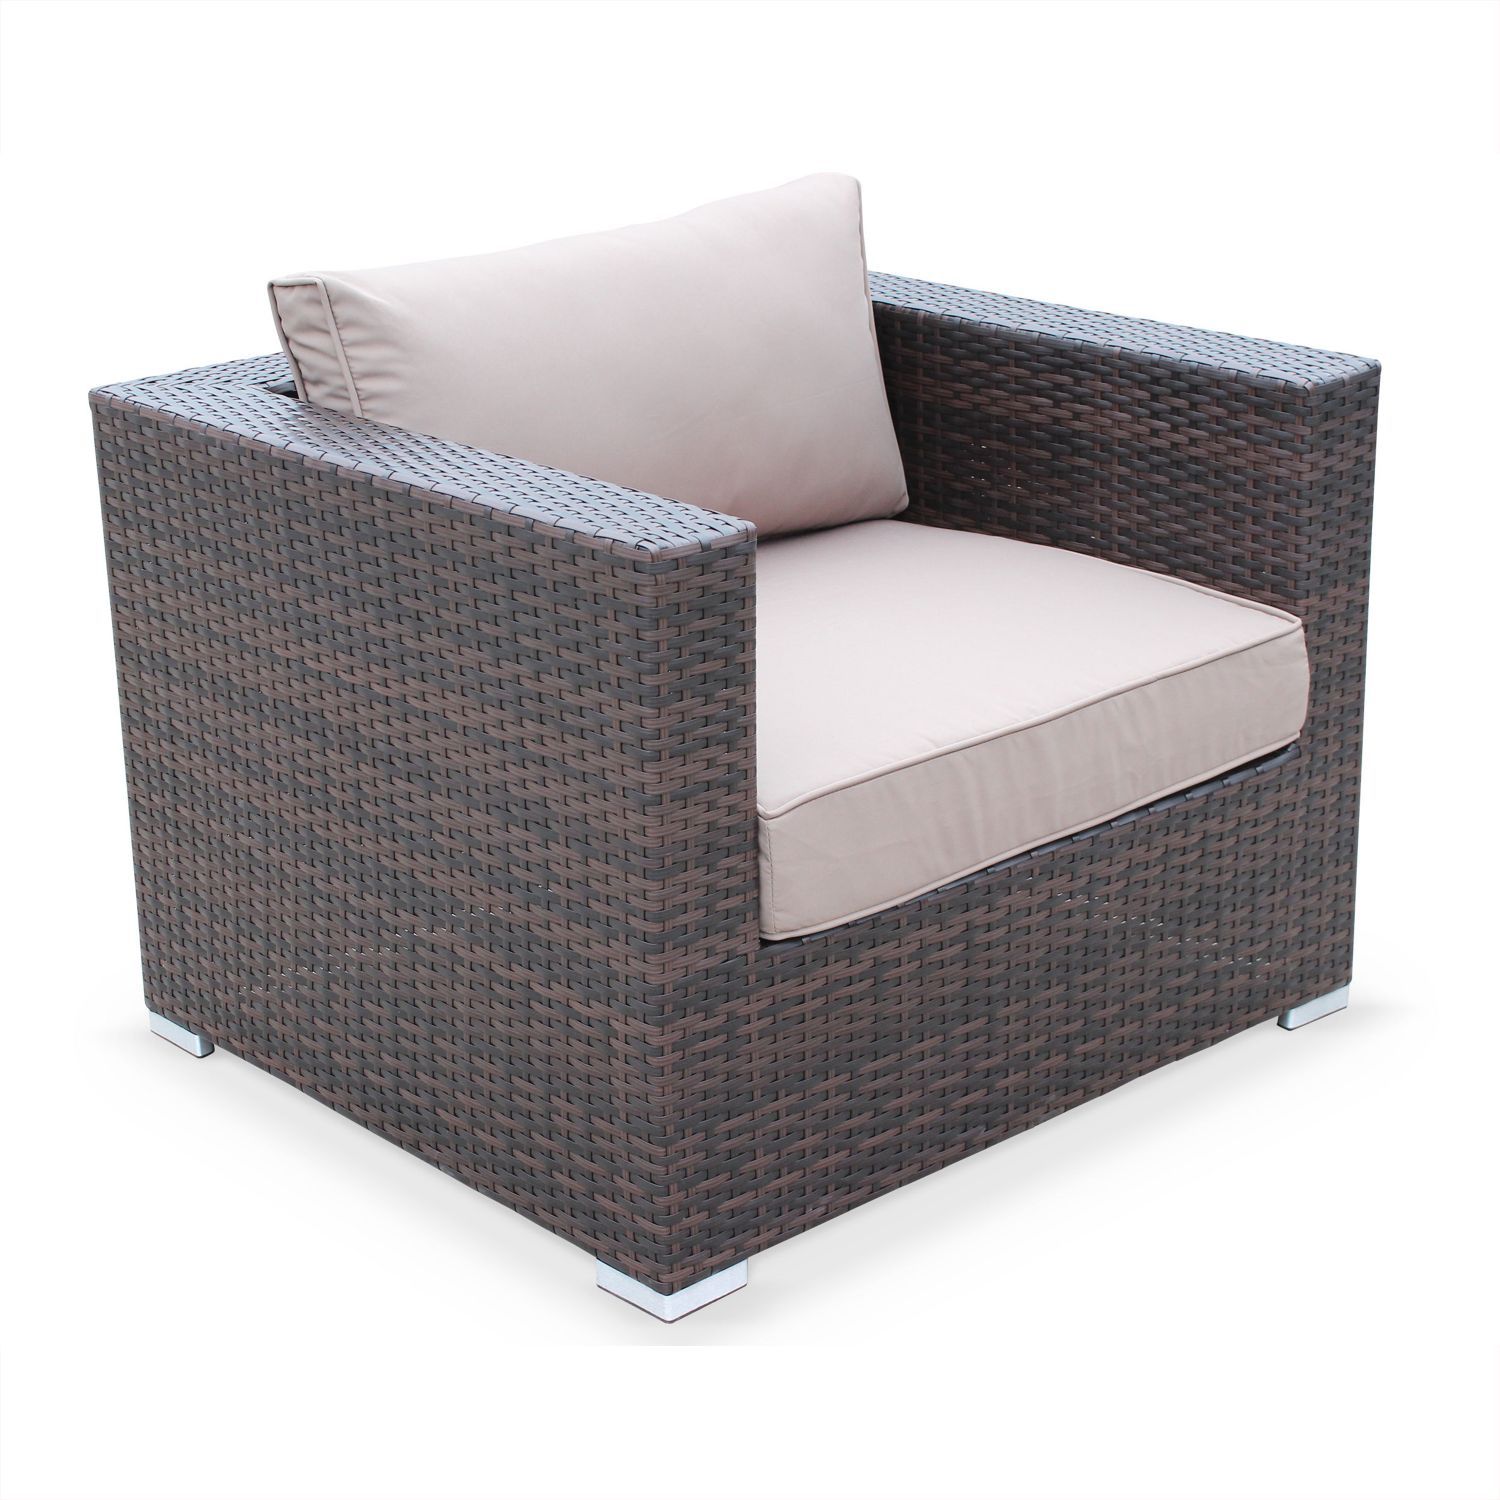 RATTAN GARDEN ARMCHAIR WITH FOOTREST - GENOVA Brown with brown cushions